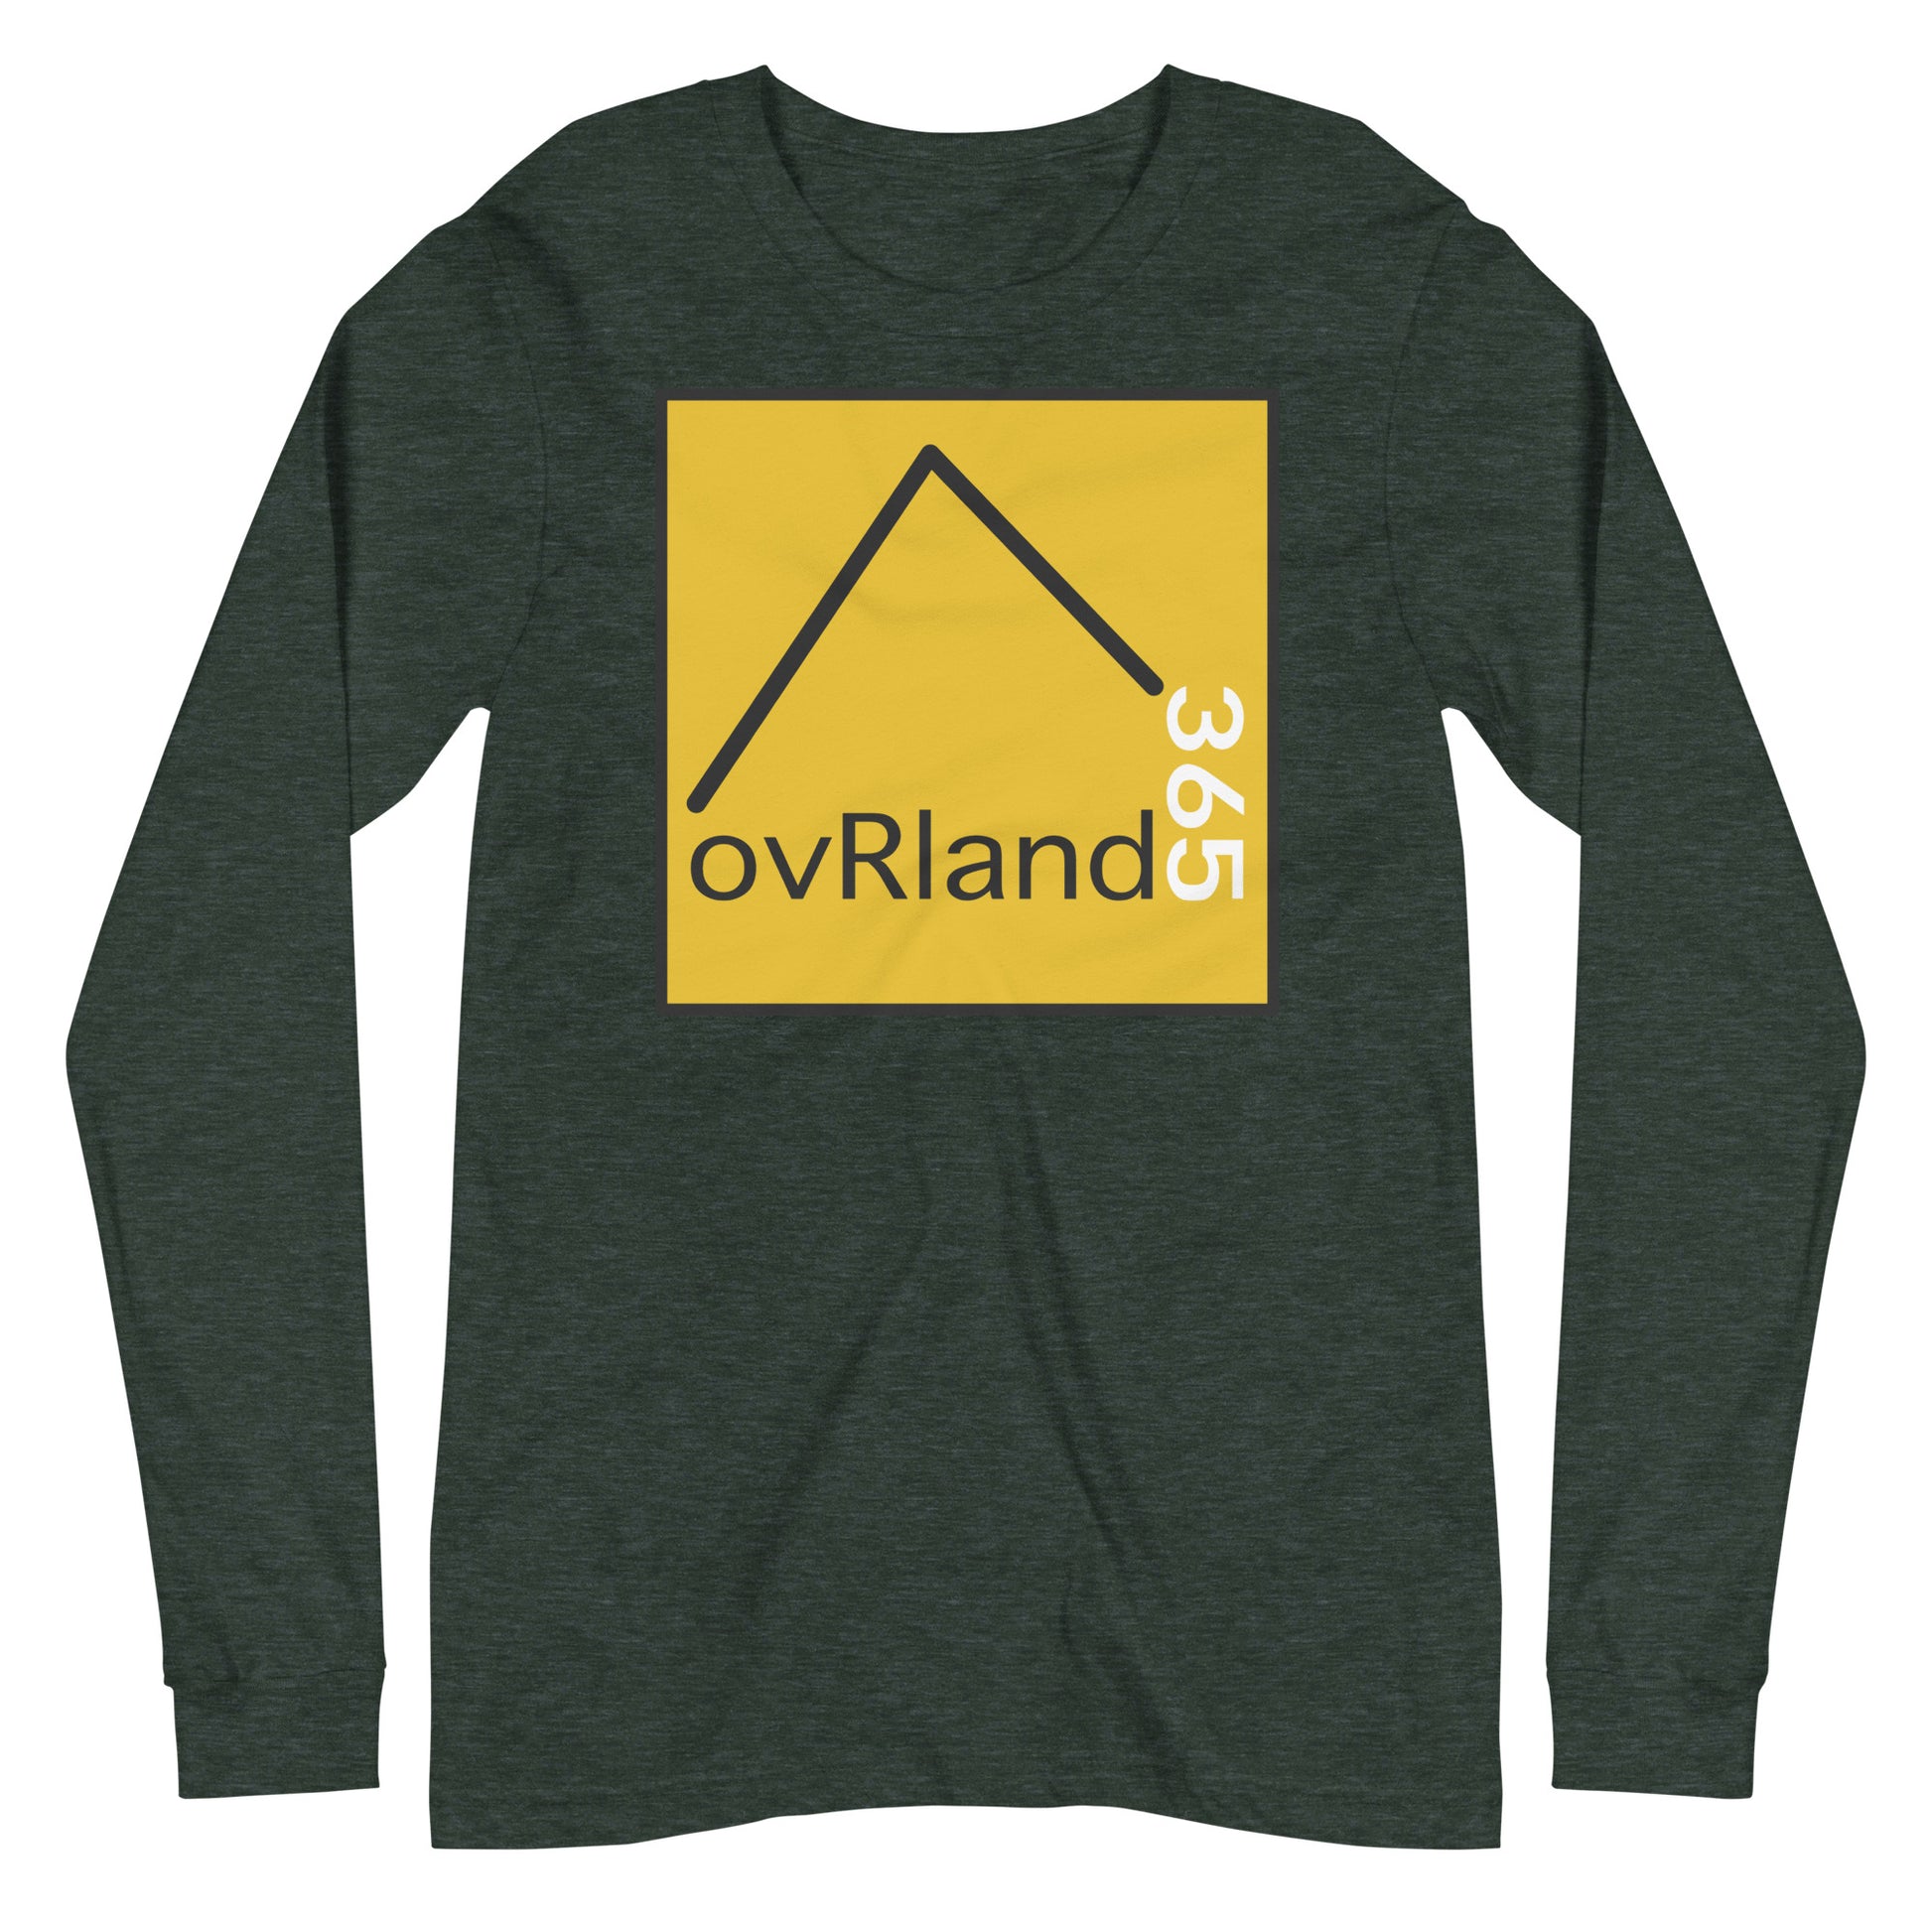 Classic ovRland365 long-sleeve, forest. overland365.com